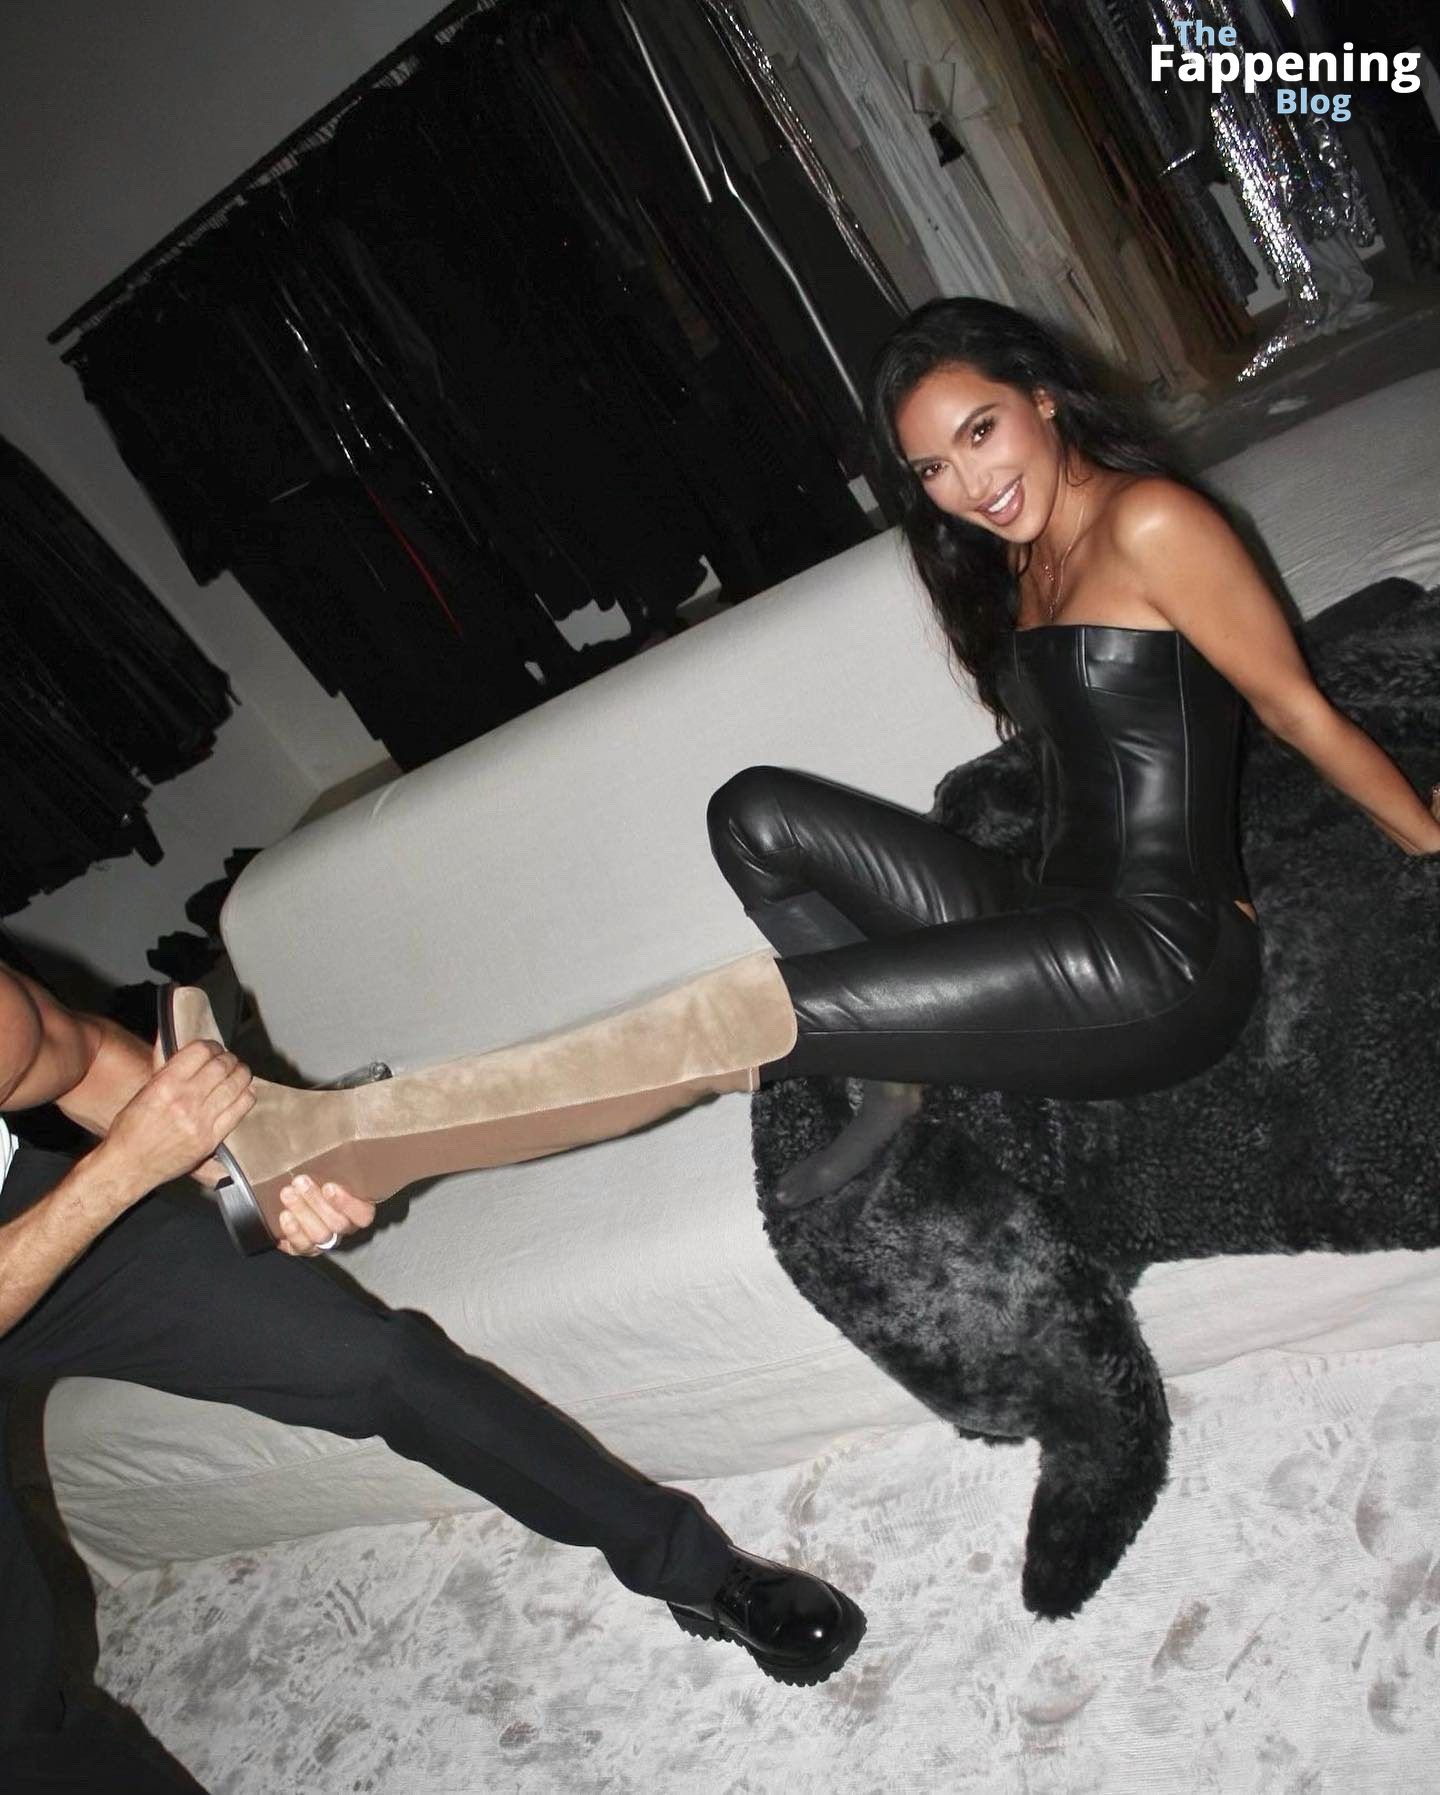 Kim Kardashian Displays Her Assets in a Leather Outfit (9 Photos)